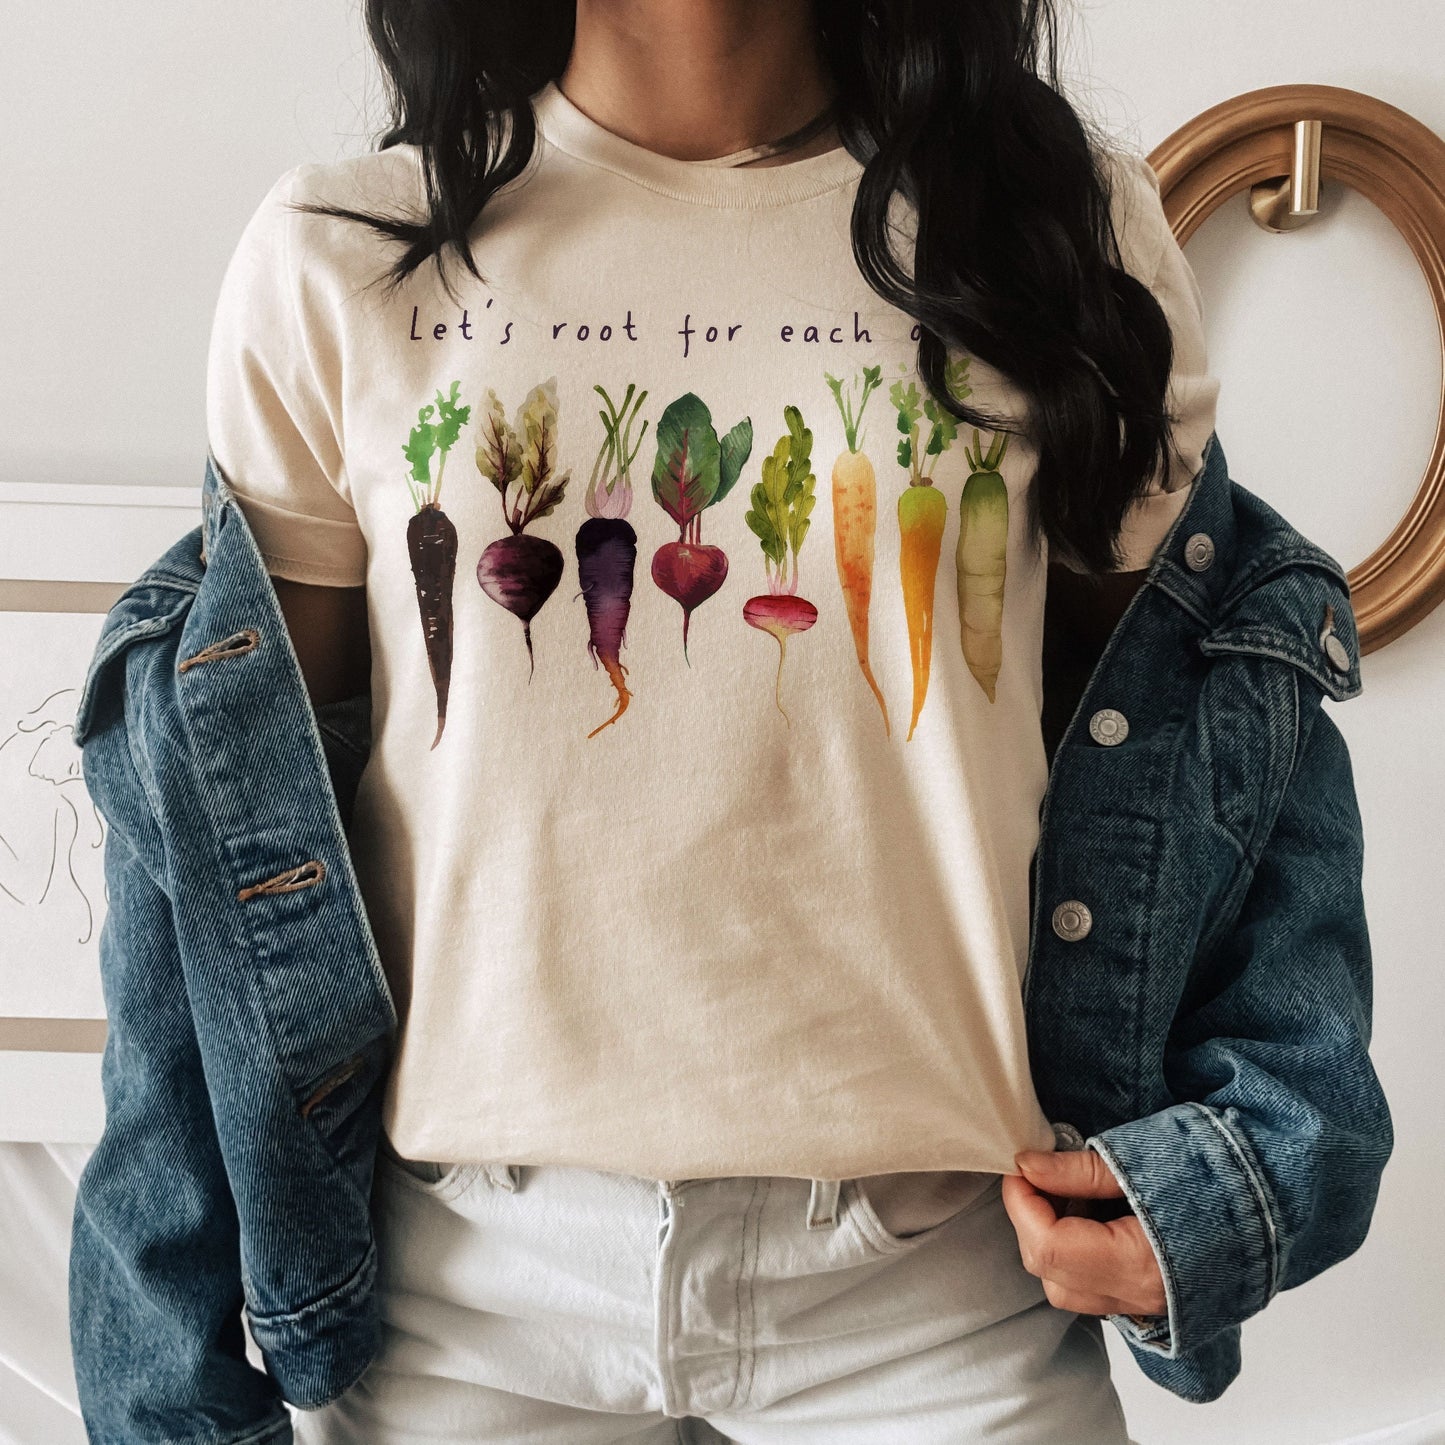 Let's root for each other and watch each other grow! Gardening Vegetable Green Thumb Design | UNISEX Relaxed Jersey T-Shirt for Women